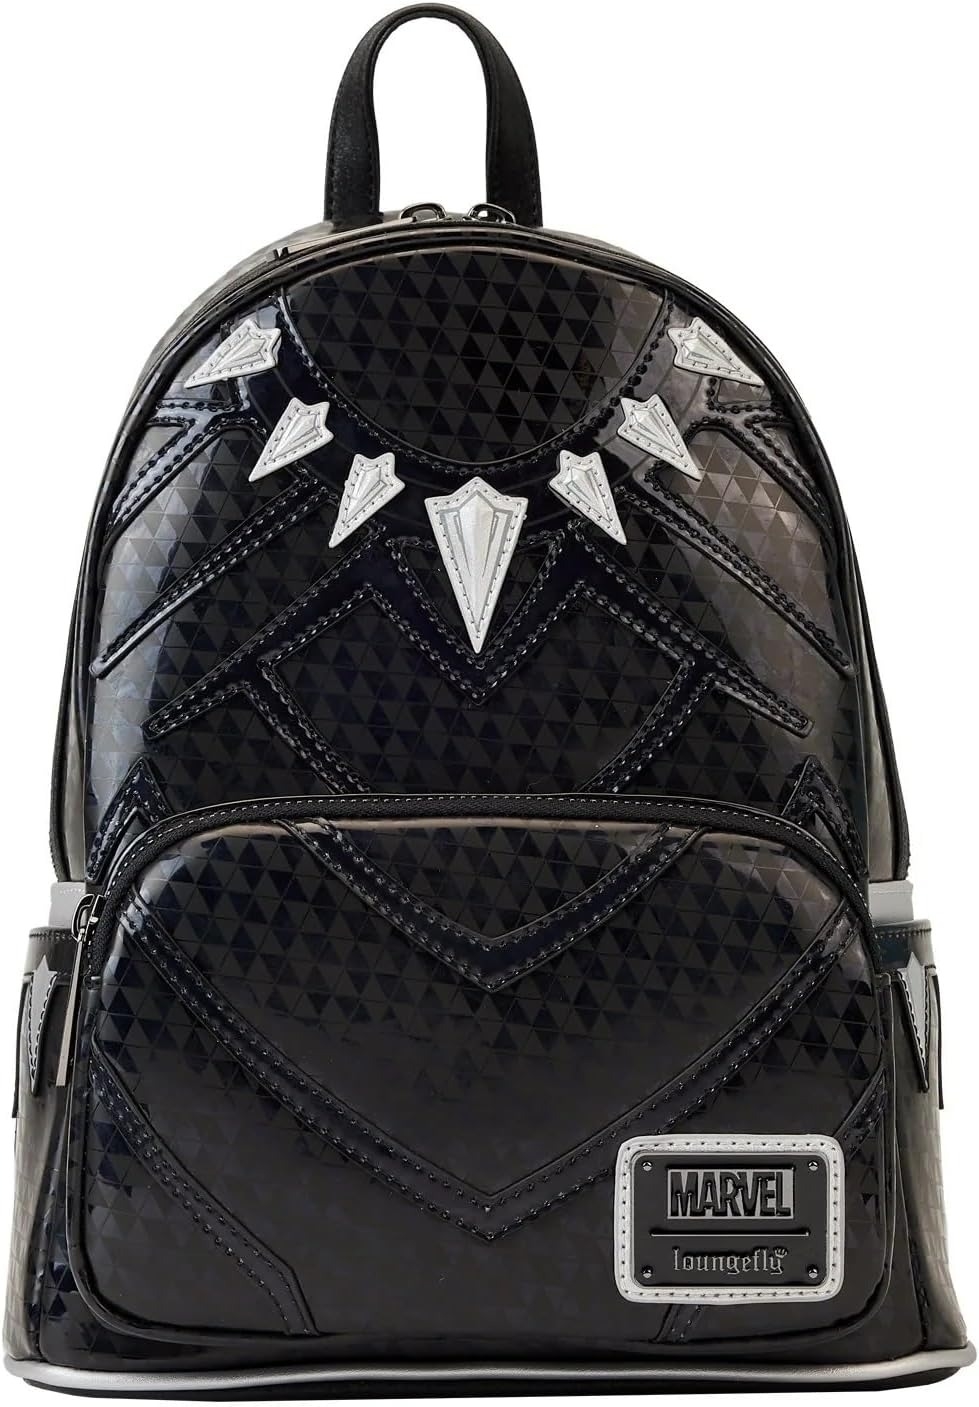 Marvel Loungefly backpack with a Black Panther theme, featuring angular silver designs characteristic of the superhero&#x27;s costume